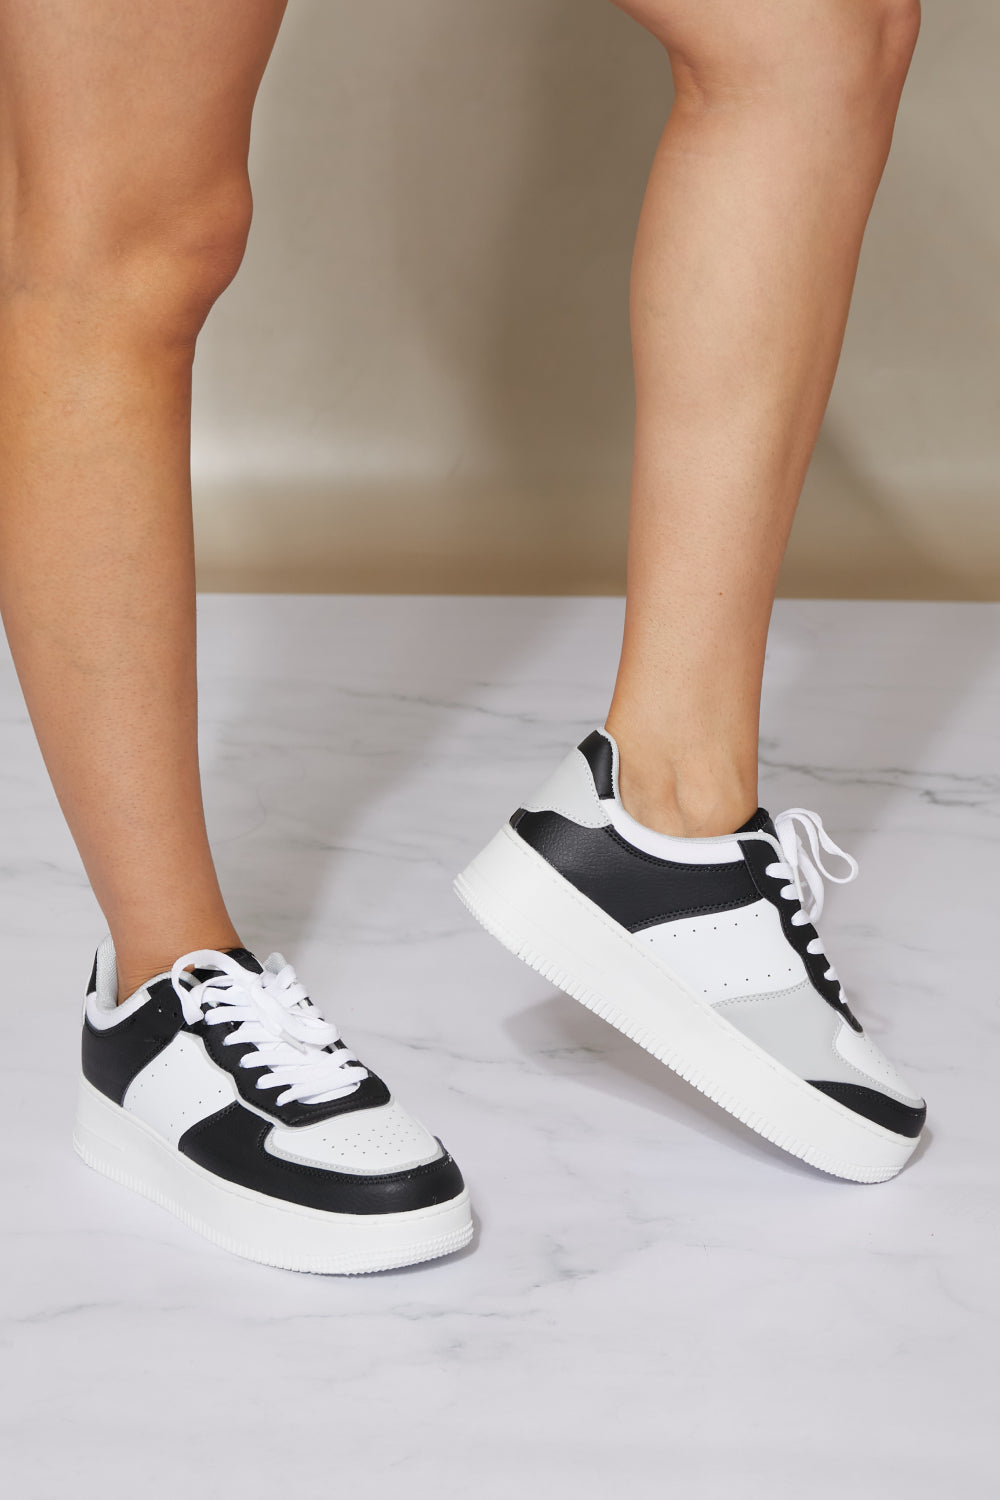 Berness Mile a Minute Platform Sneakers in Black and White Trendsi